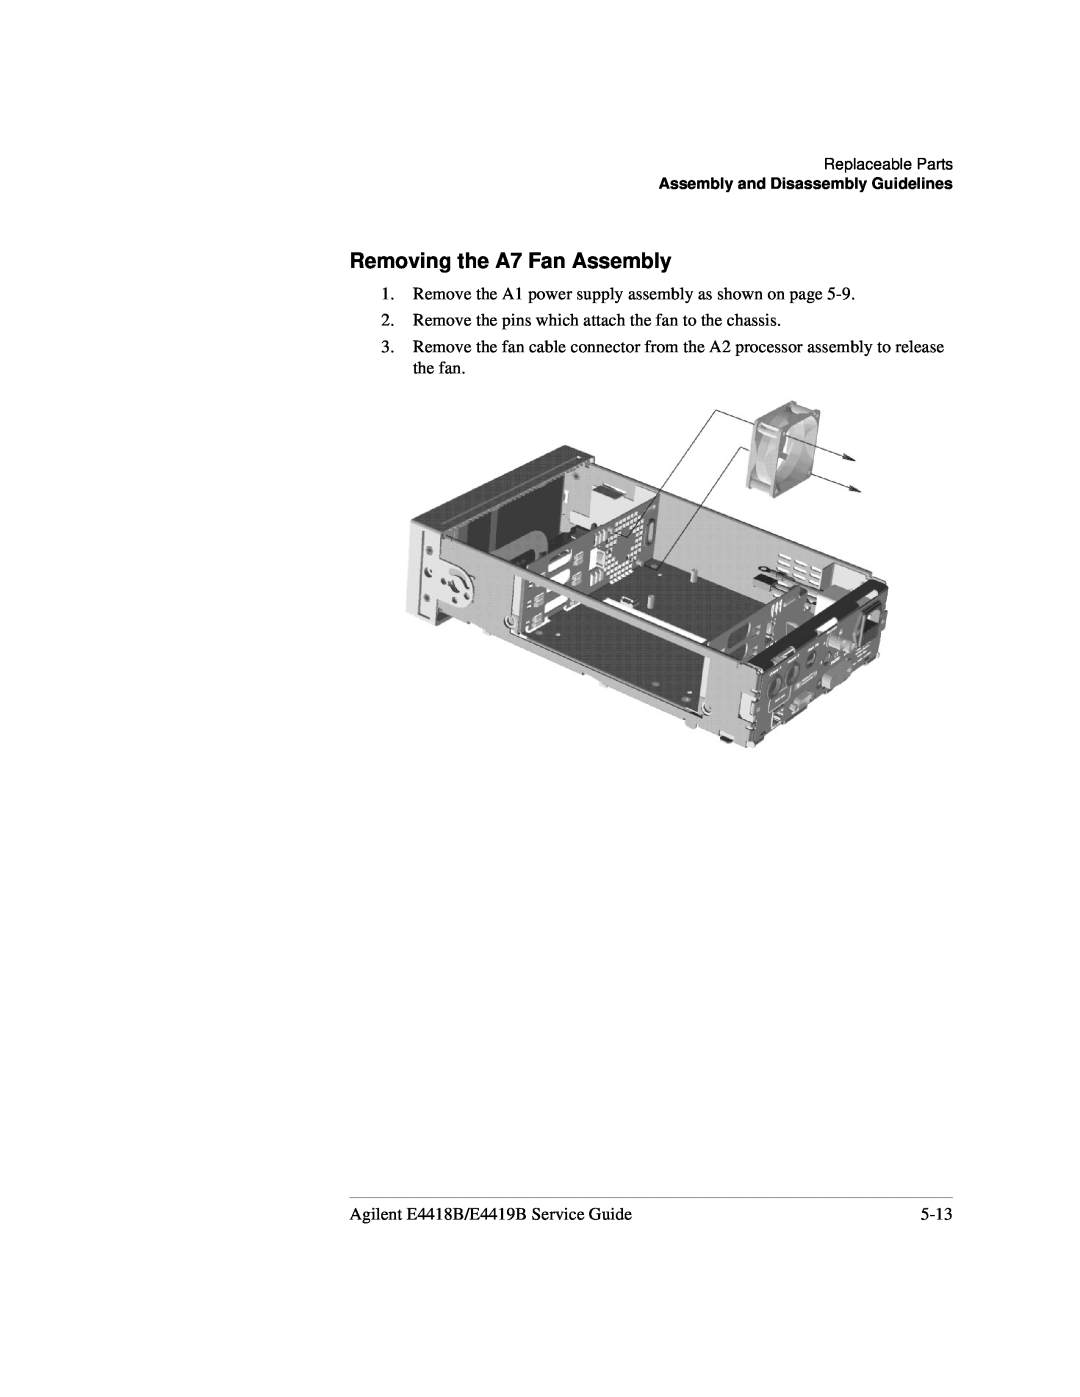 Agilent Technologies e4419b manual Removing the A7 Fan Assembly, Remove the A1 power supply assembly as shown on page, 5-13 